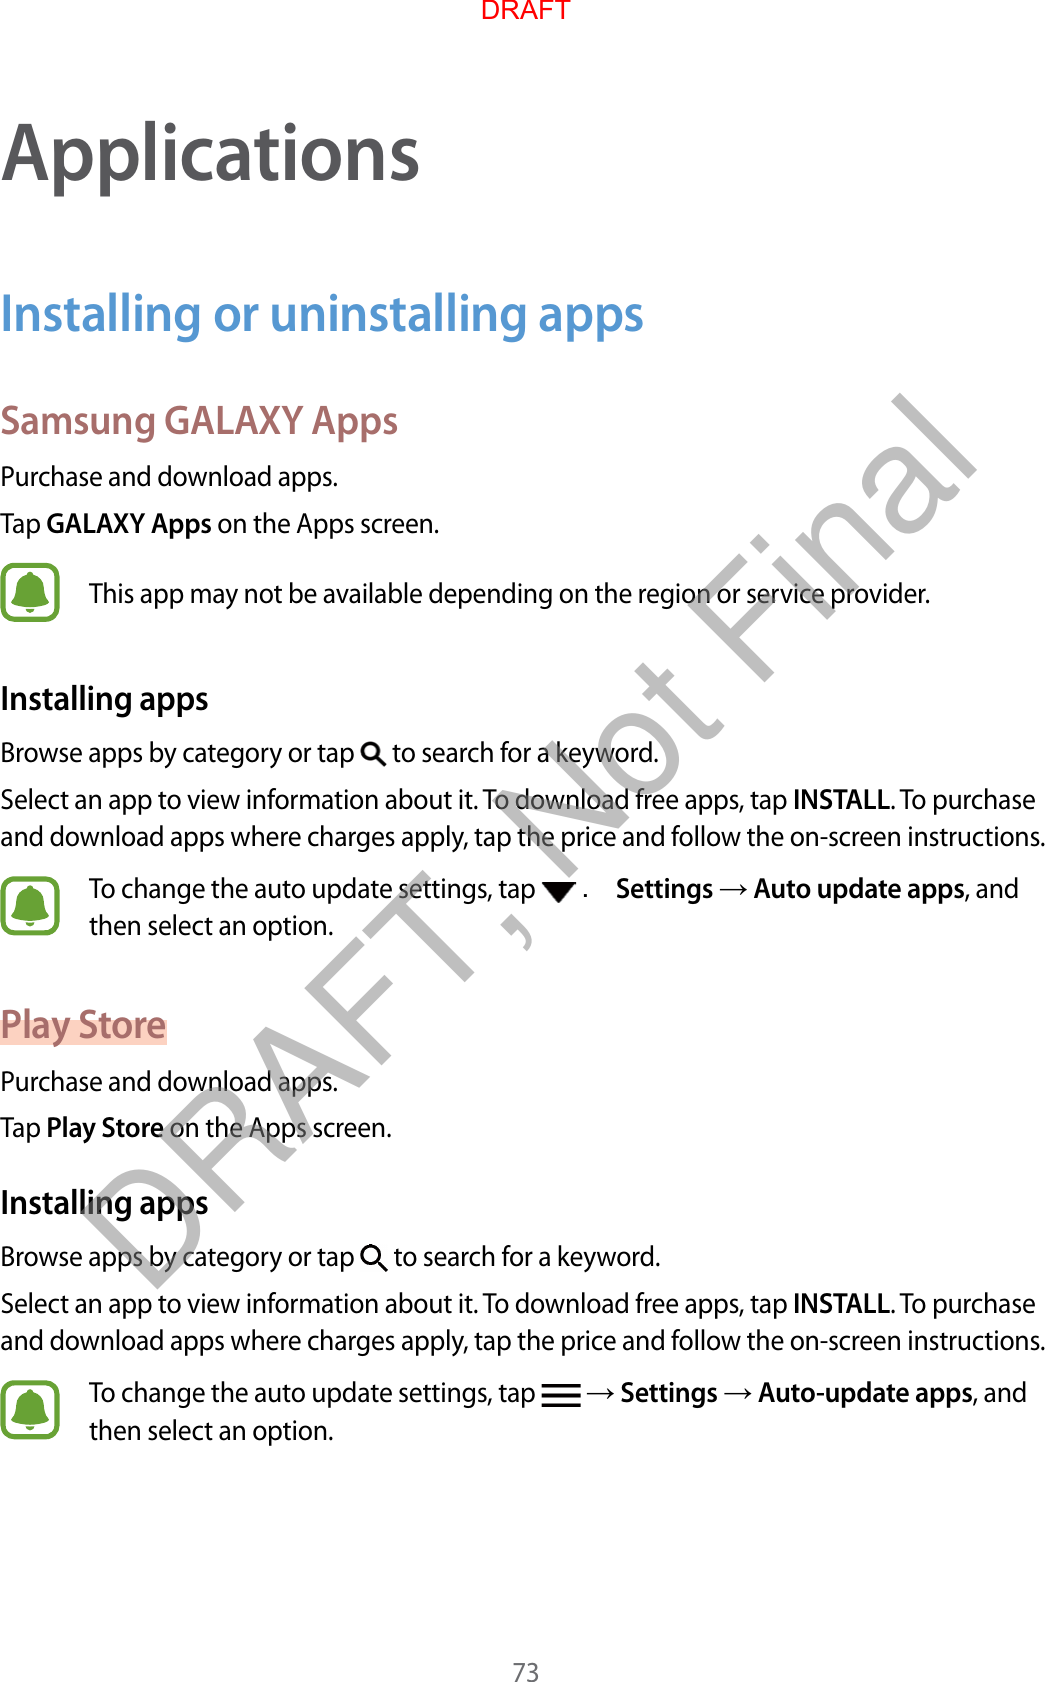 73ApplicationsInstalling or uninstalling appsSamsung GALAXY AppsPurchase and download apps.Tap GALAXY Apps on the Apps screen.This app may not be available depending on the region or service provider.Installing appsBrowse apps by category or tap   to search for a keyword.Select an app to view information about it. To download free apps, tap INSTALL. To purchase and download apps where charges apply, tap the price and follow the on-screen instructions.To change the auto update settings, tap   . Settings  Auto update apps, and then select an option.Play StorePurchase and download apps.Tap Play Store on the Apps screen.Installing appsBrowse apps by category or tap   to search for a keyword.Select an app to view information about it. To download free apps, tap INSTALL. To purchase and download apps where charges apply, tap the price and follow the on-screen instructions.To change the auto update settings, tap    Settings  Auto-update apps, and then select an option.DRAFTDRAFT, Not Final